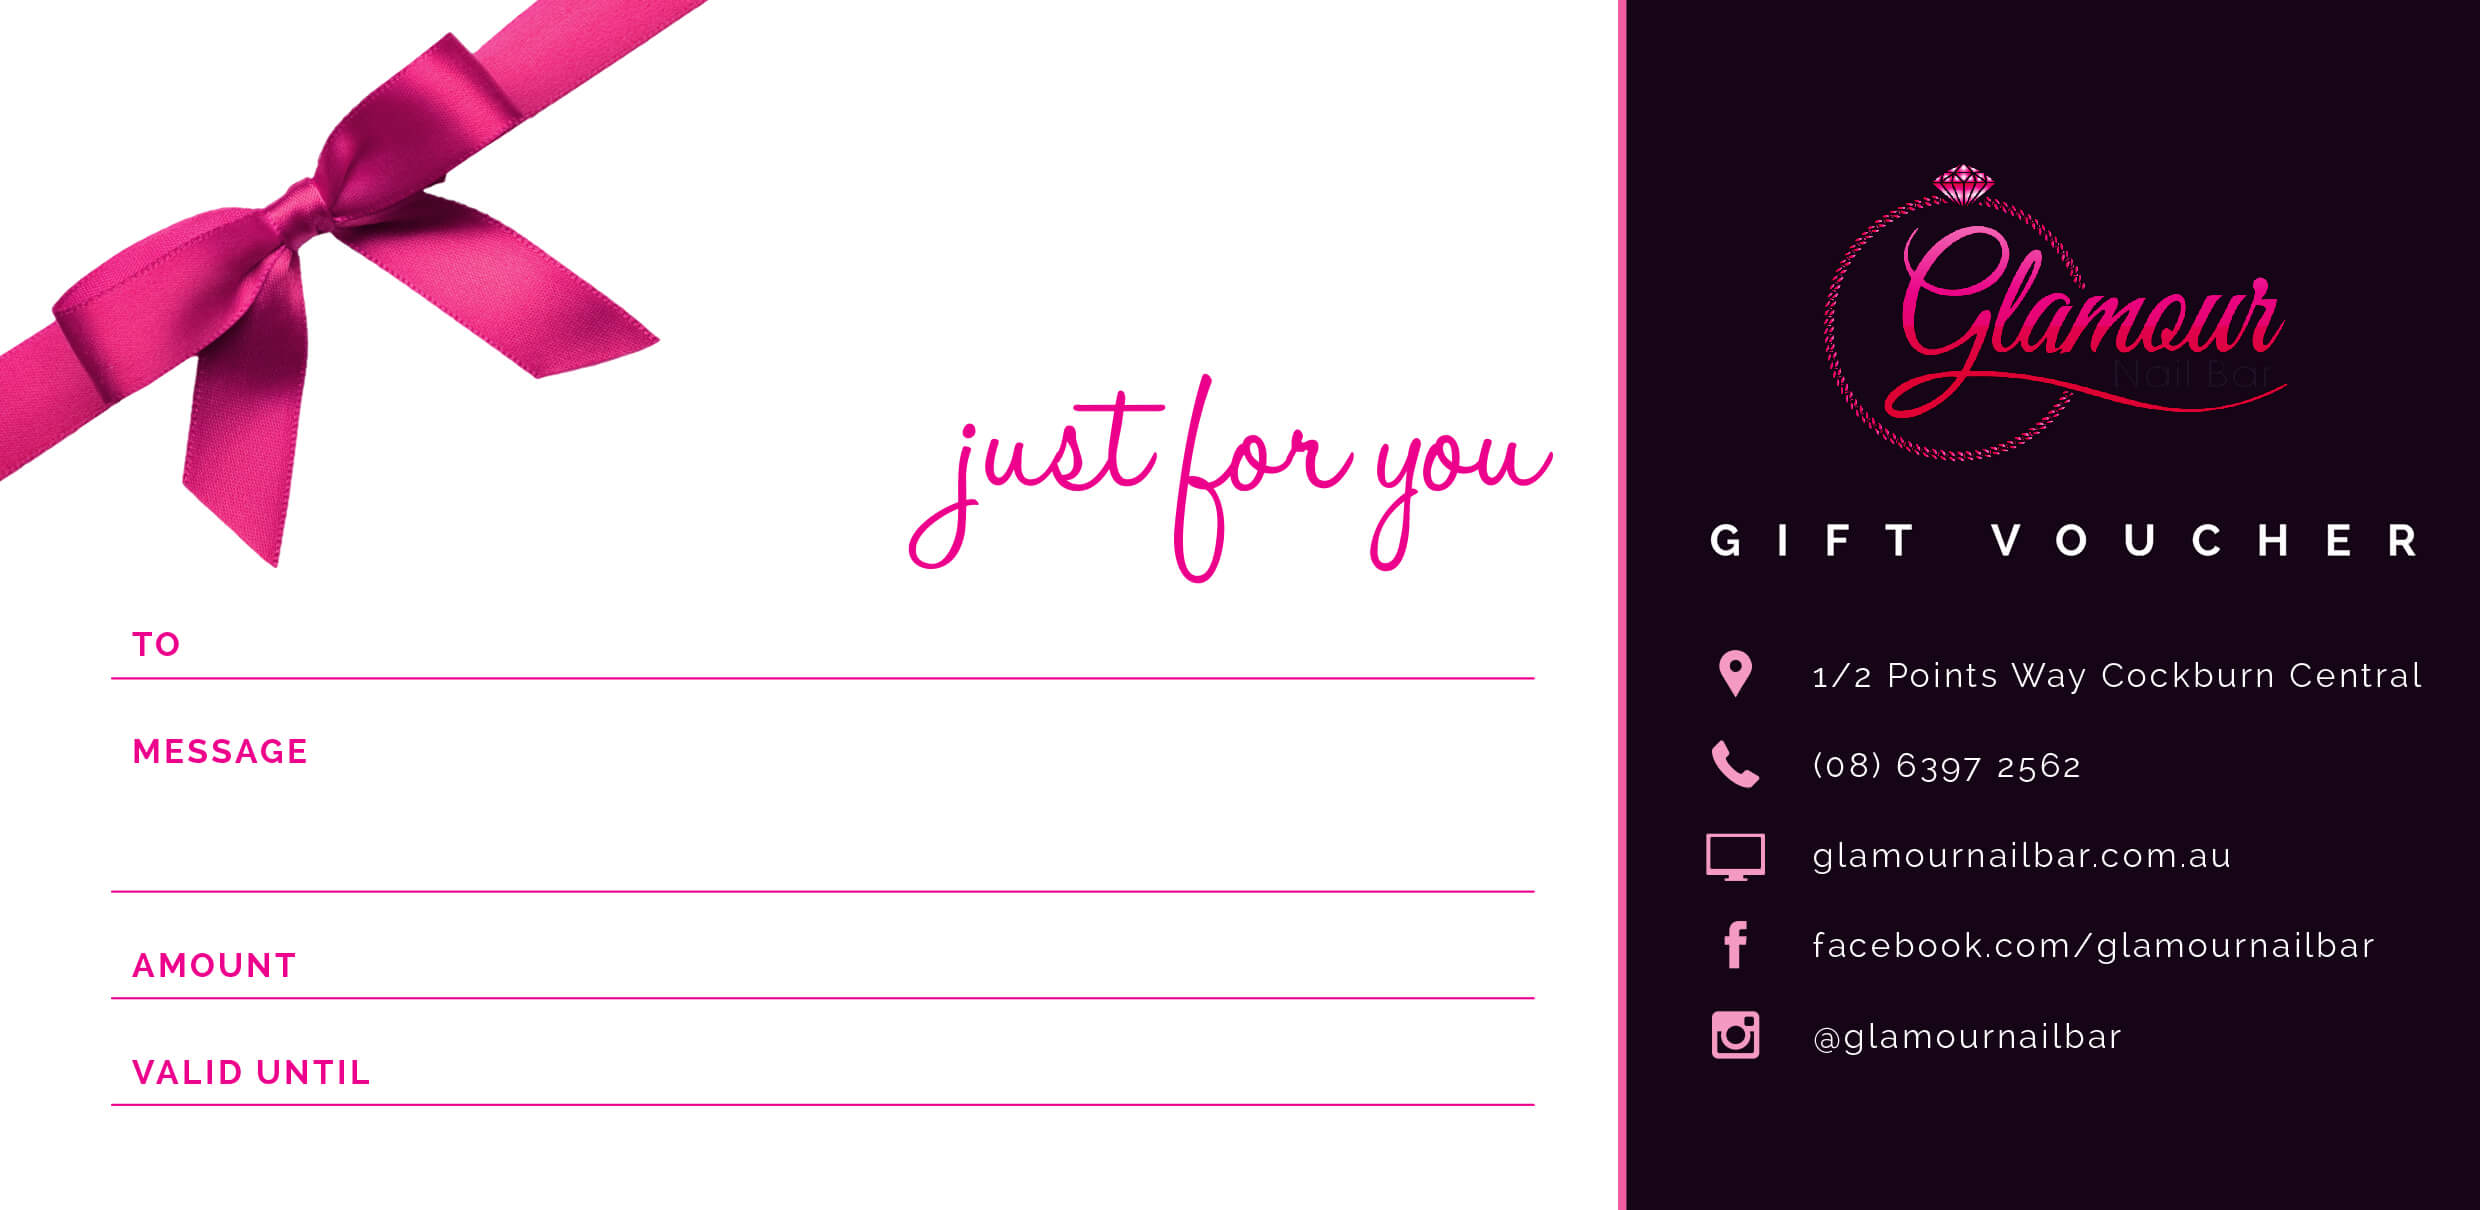 Free Voucher Template Receipt Voucher Template Sample With Nail Gift Certificate Template Free